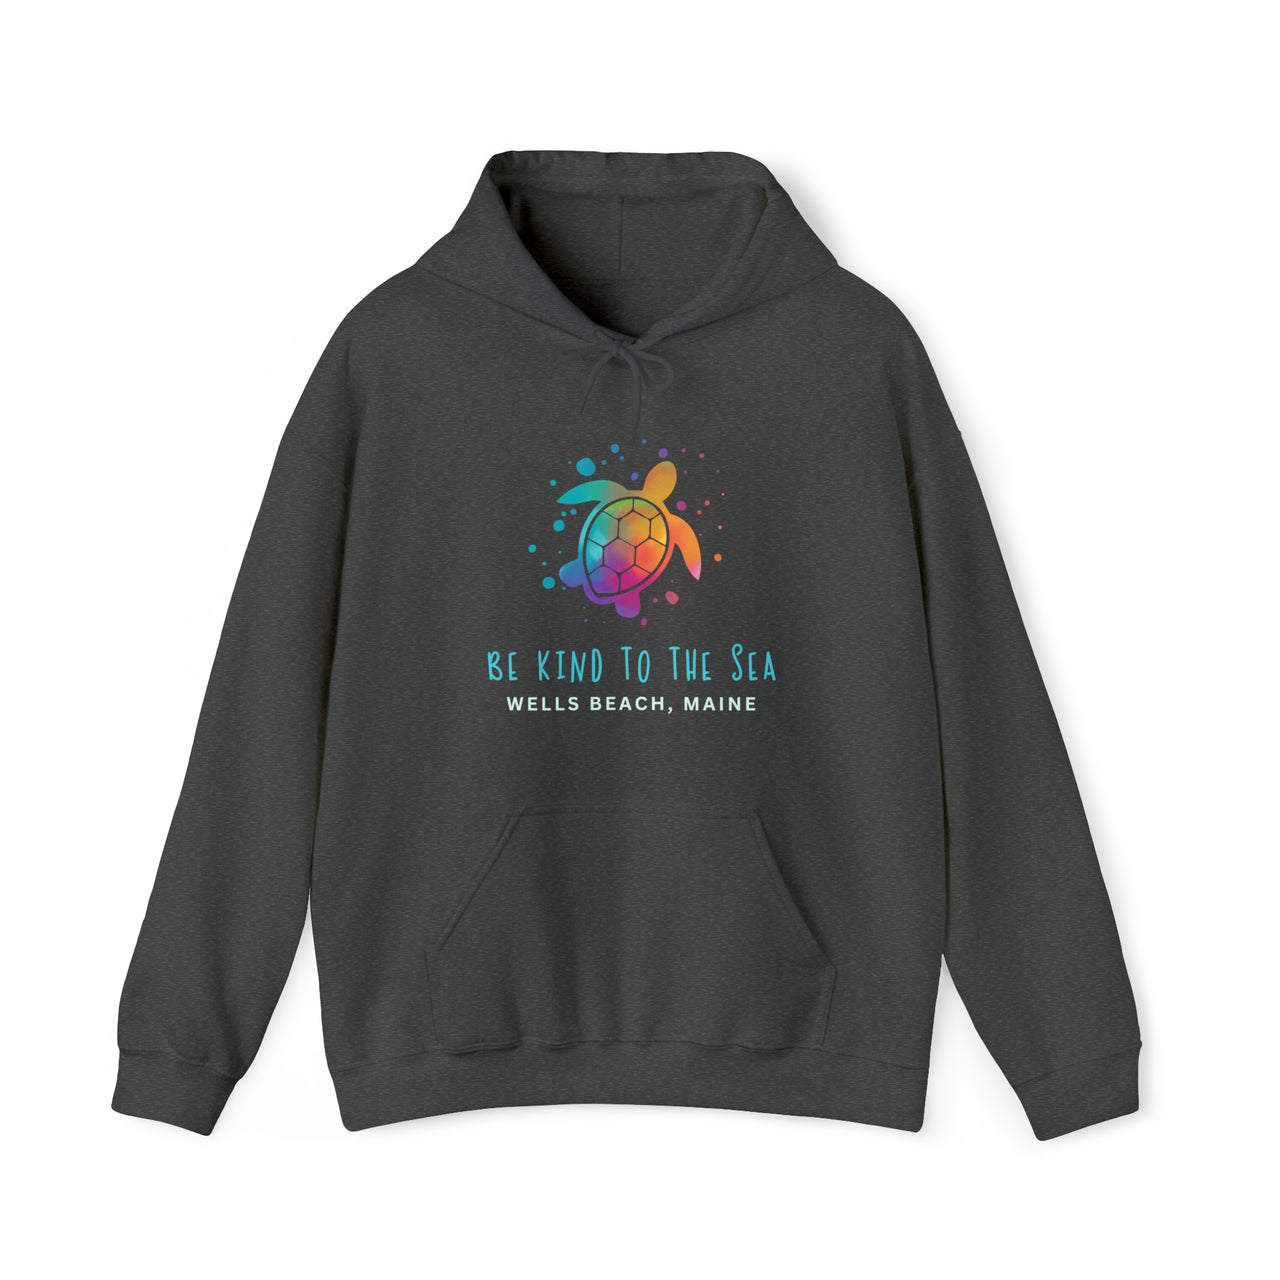 Be Kind to the Sea Heavy Blend Hooded Sweatshirt, Personalized, Dark Heather